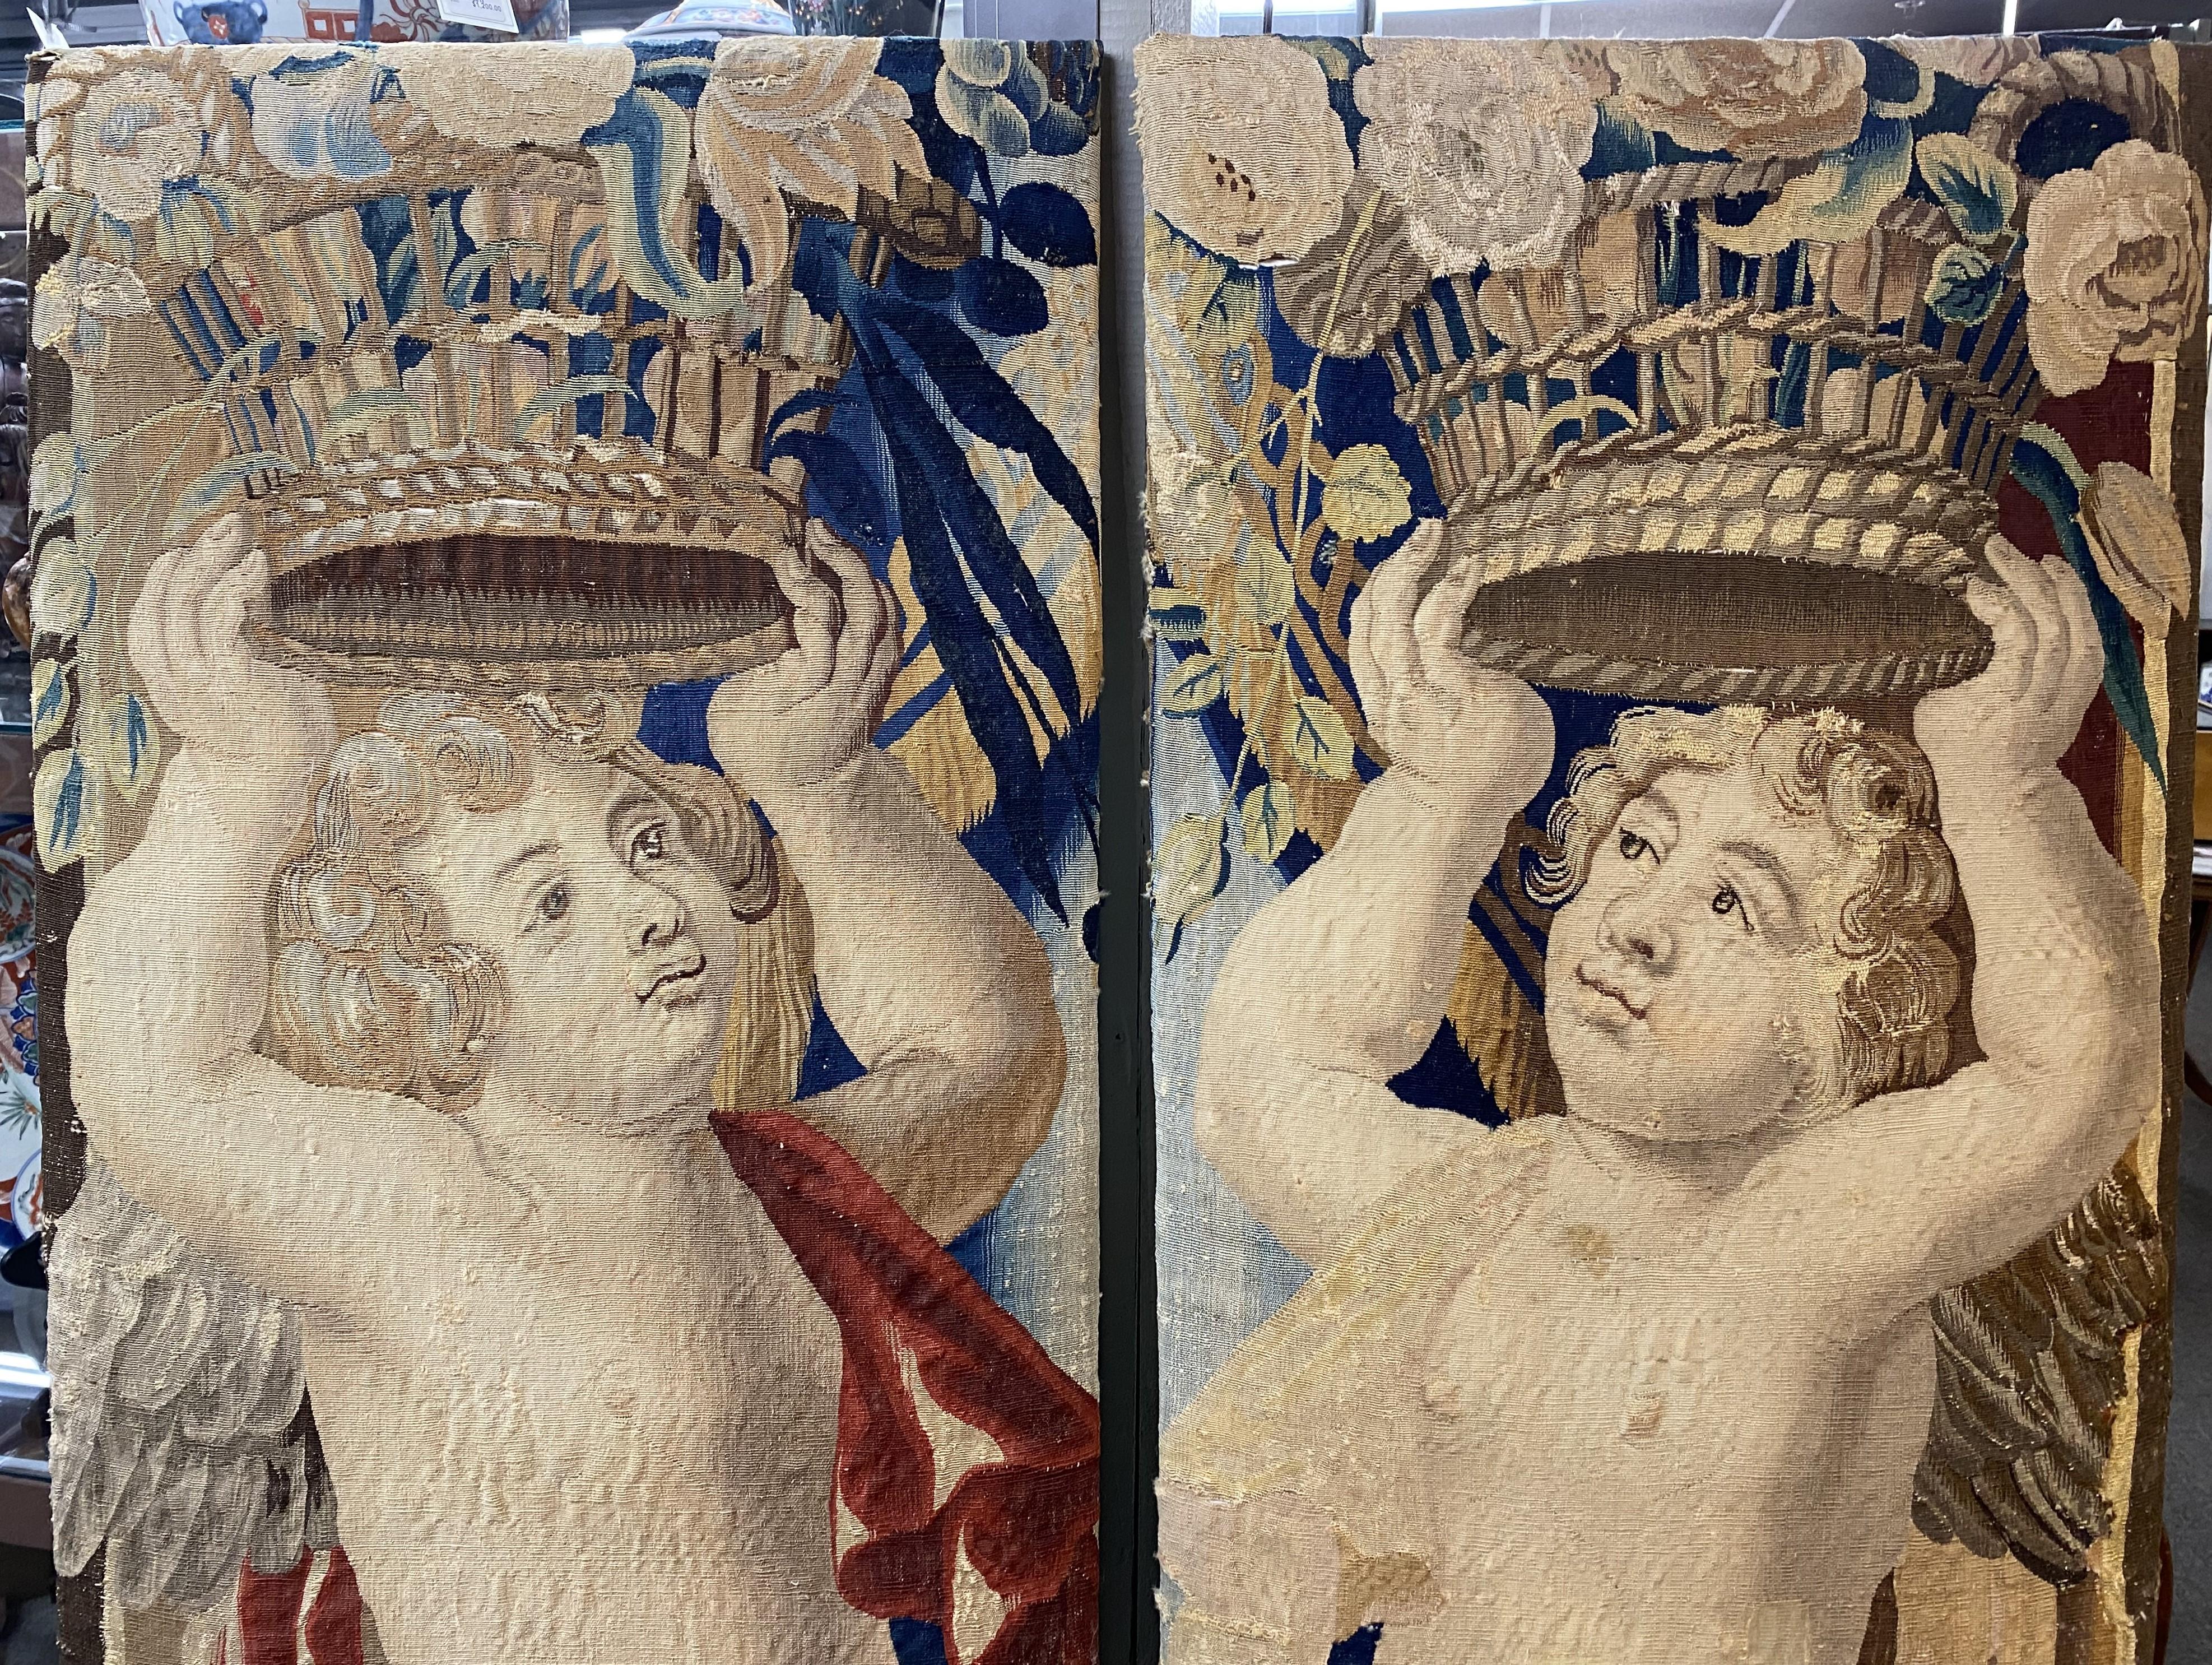 Pair of Brussels tapestry fragments finely woven of silk and wool featuring angels or putti carrying a basket of flowers above their heads. Opposing angels, one with a gold draped cloth the other with a red cloth. Probably Belgium in origin, circa